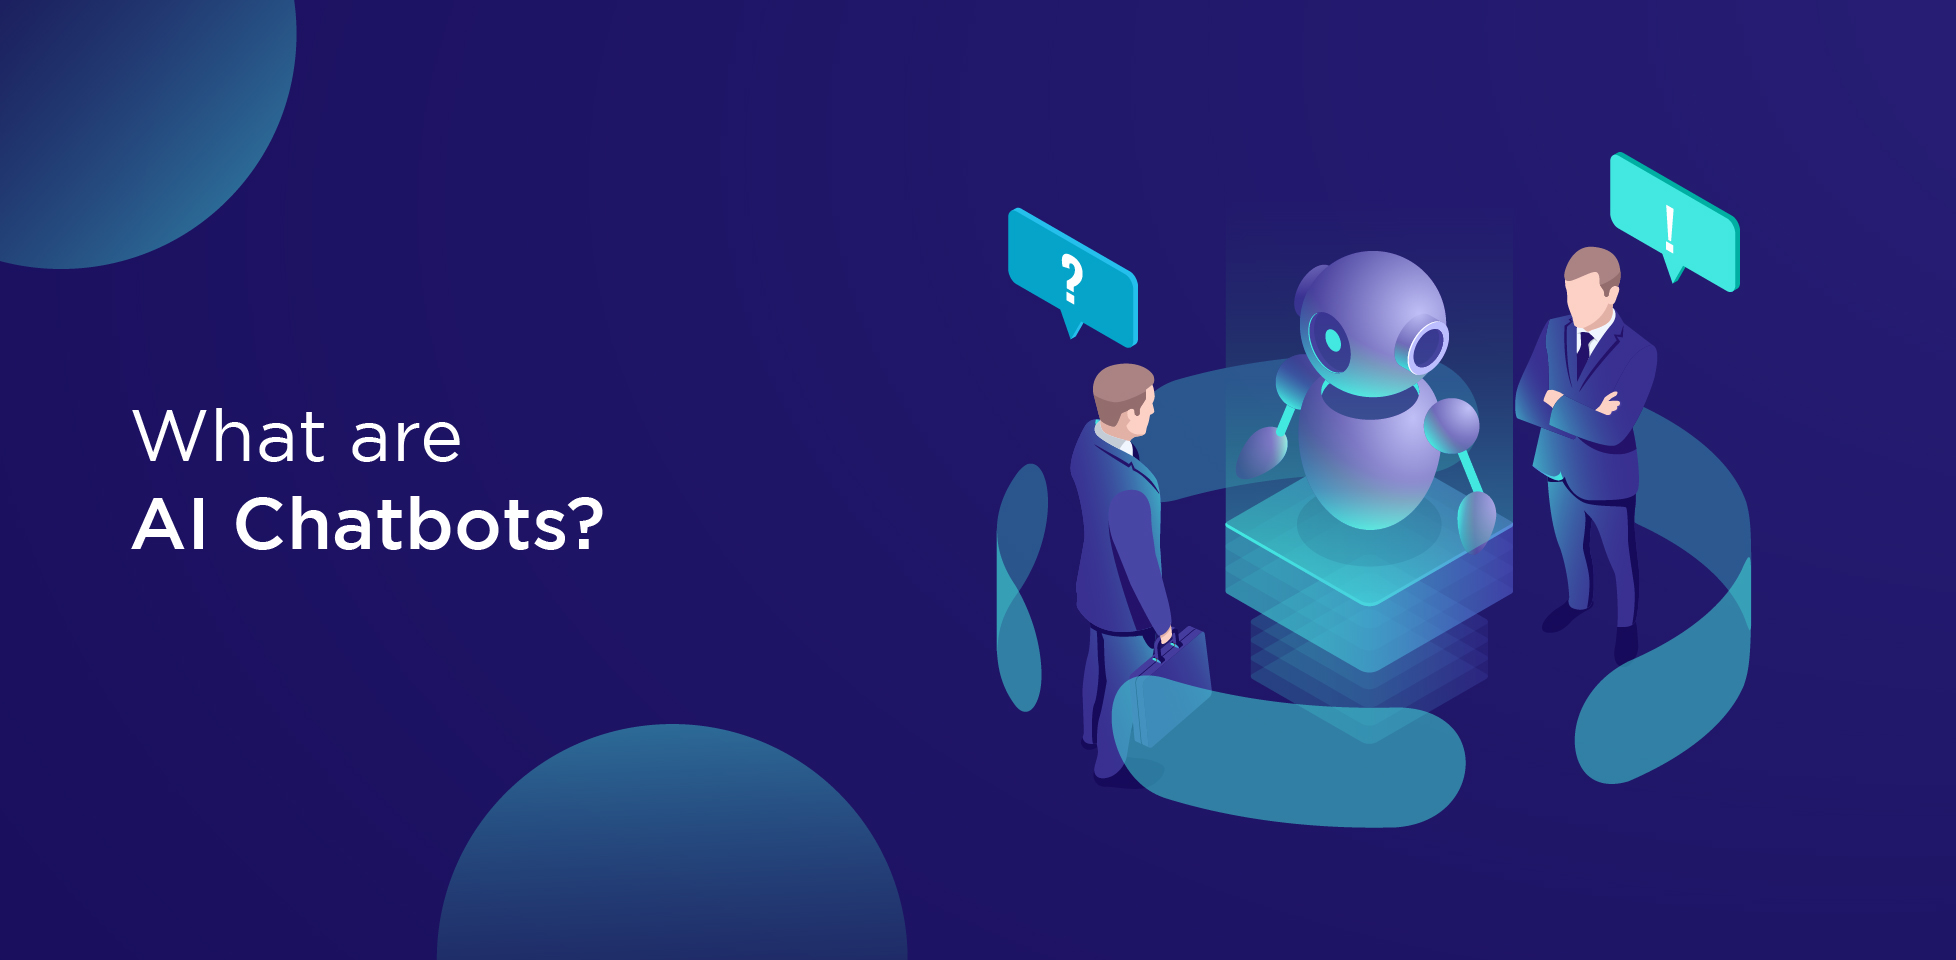 What are AI chatbots?